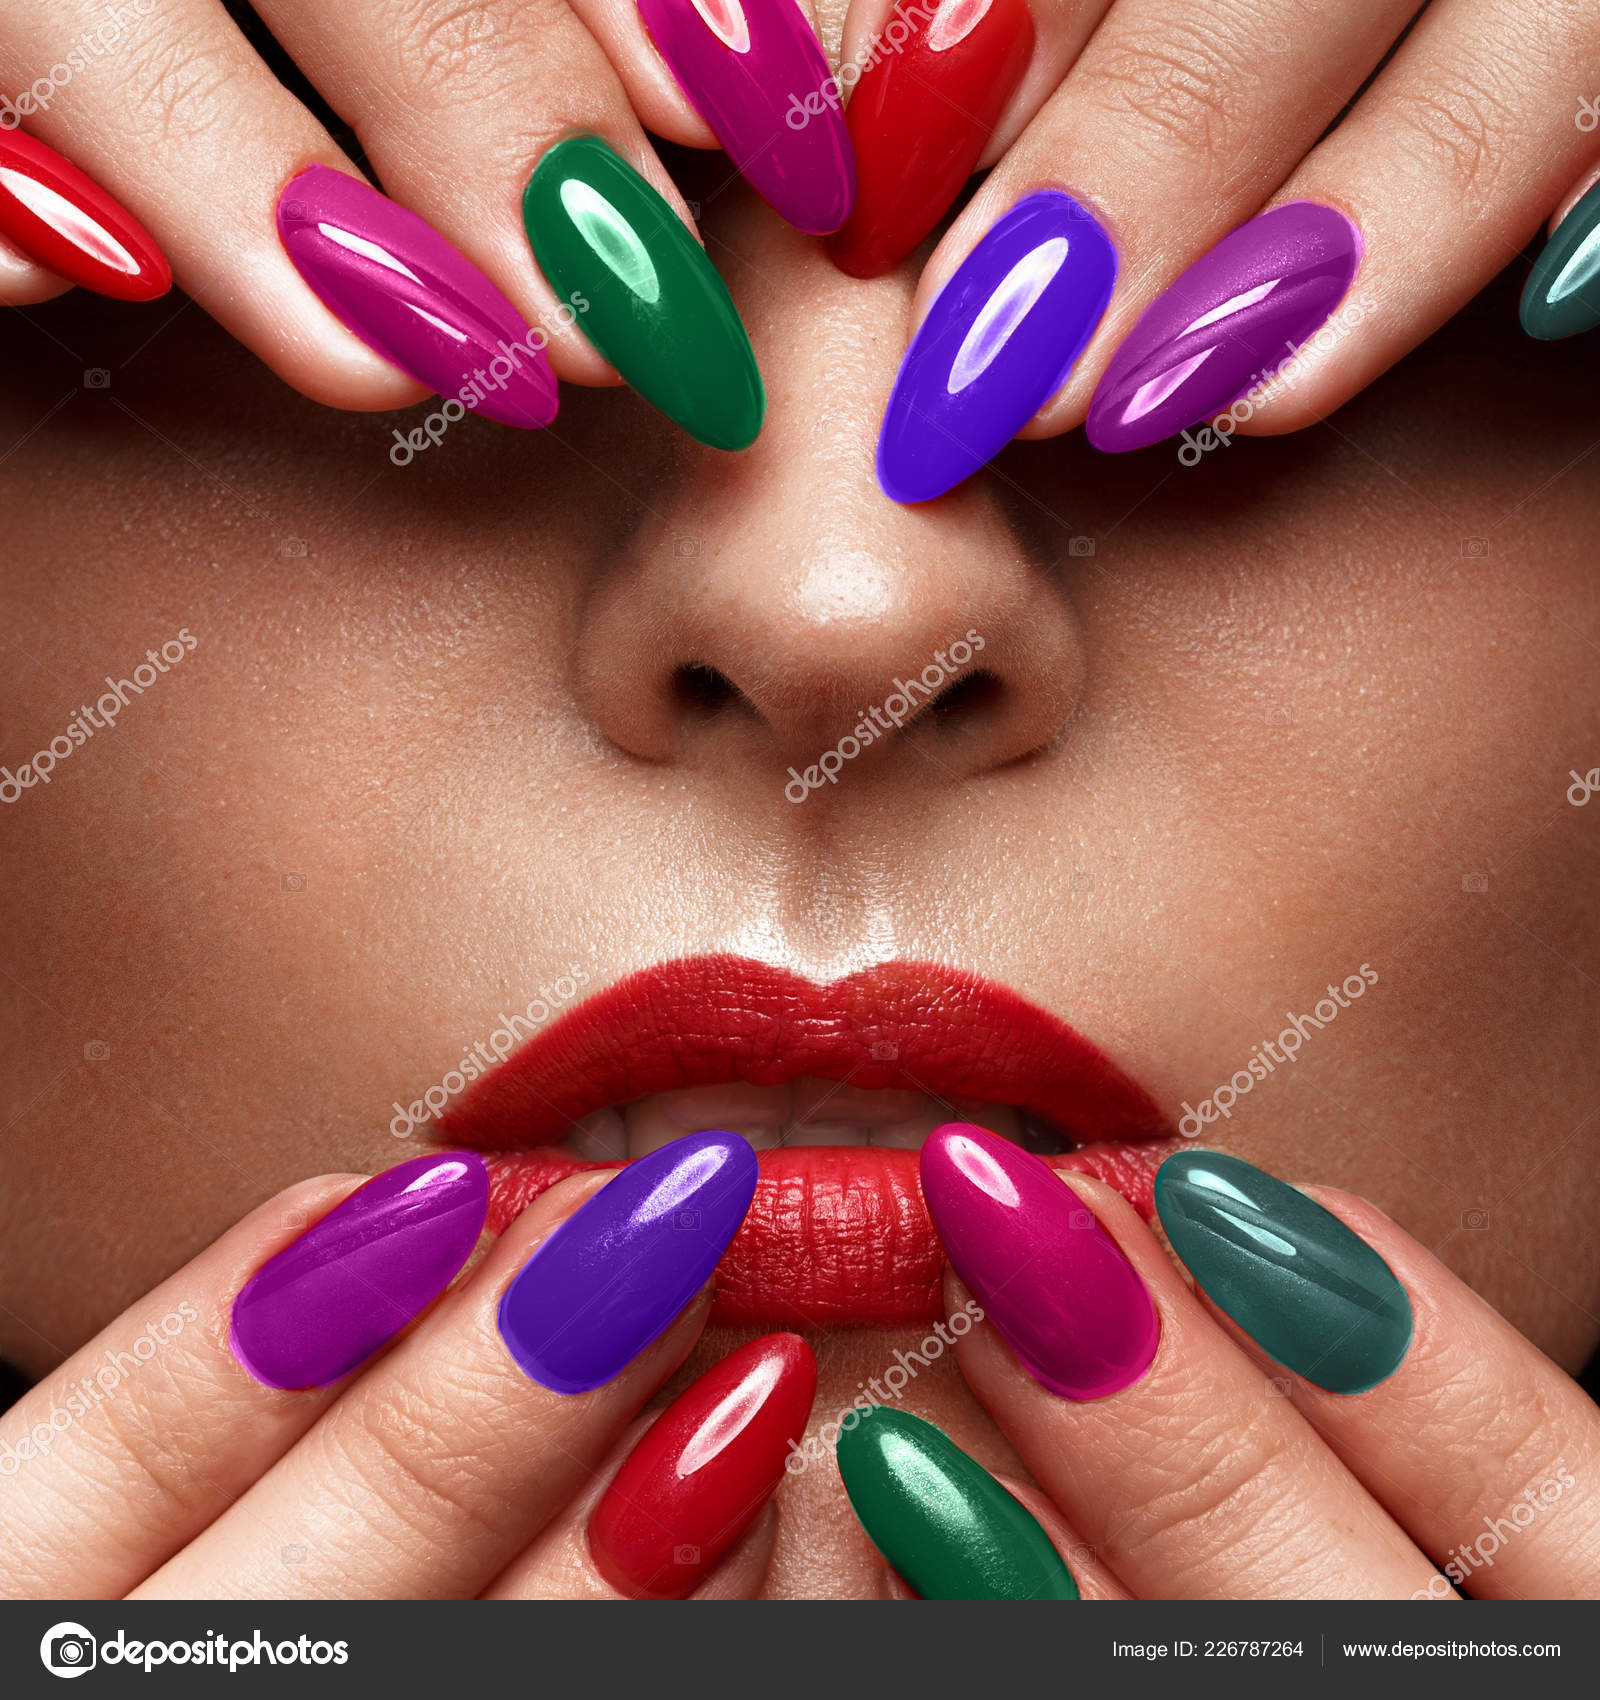 Nail Colors Guide for the Different Skin Tones and Seasons